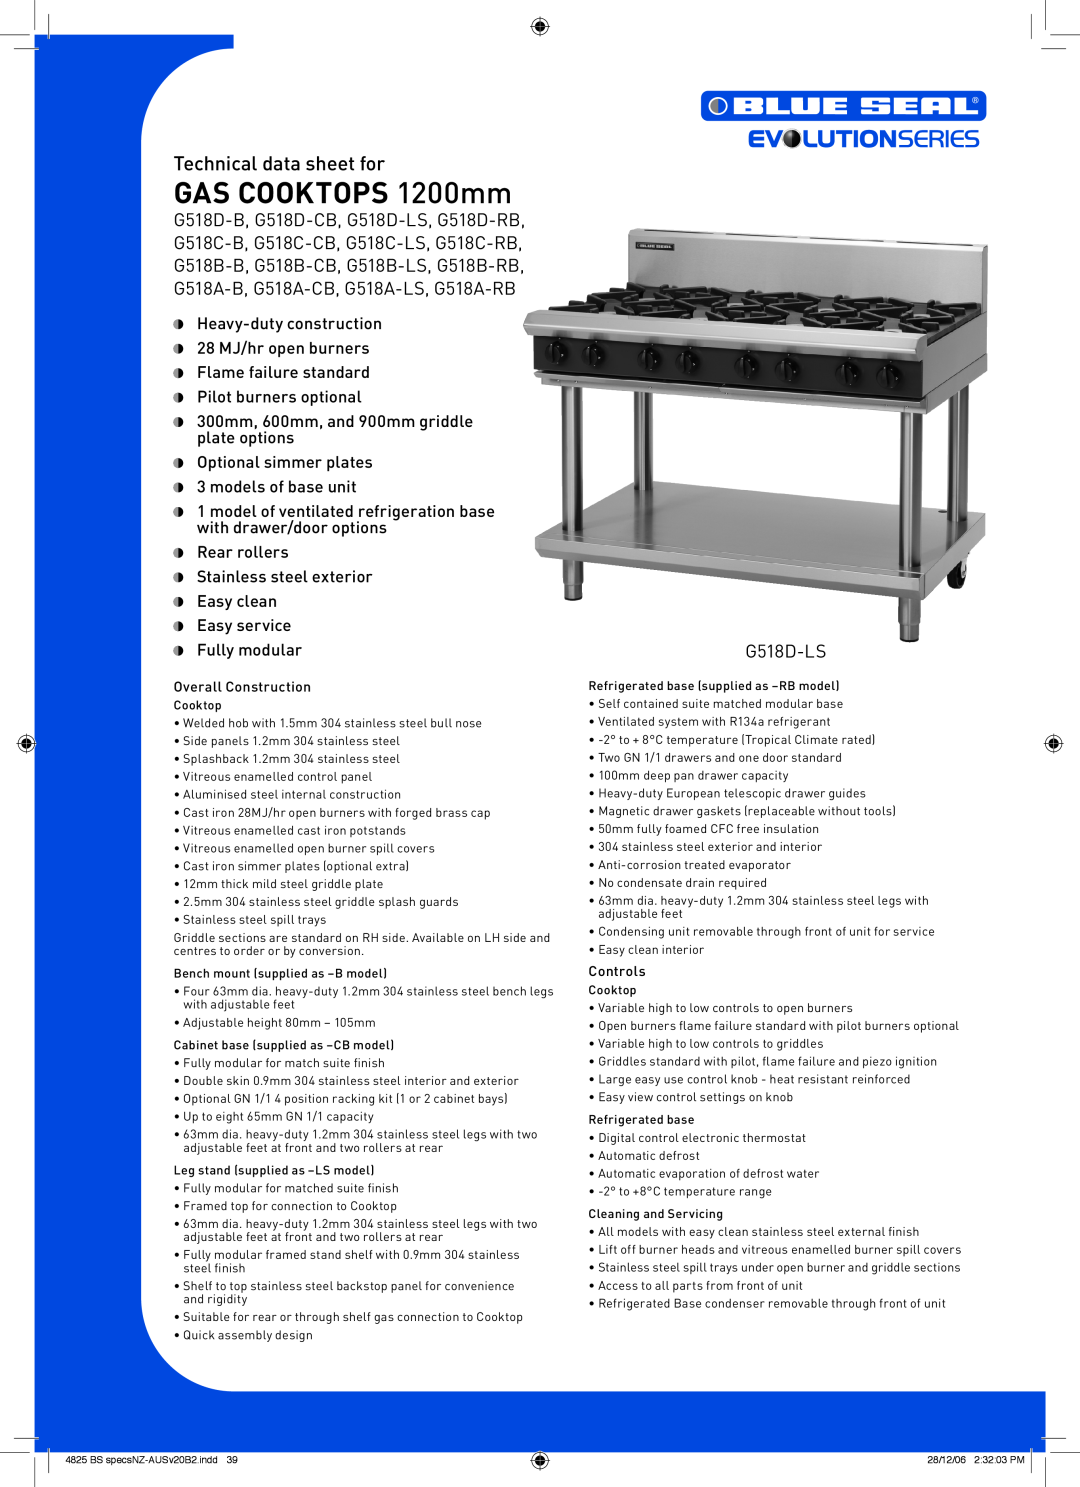 Moffat G518C-RB, G518D-RB manual GAS COOKTOPS 1200mm, Technical data sheet for, Overall Construction, Controls, G518D-LS 